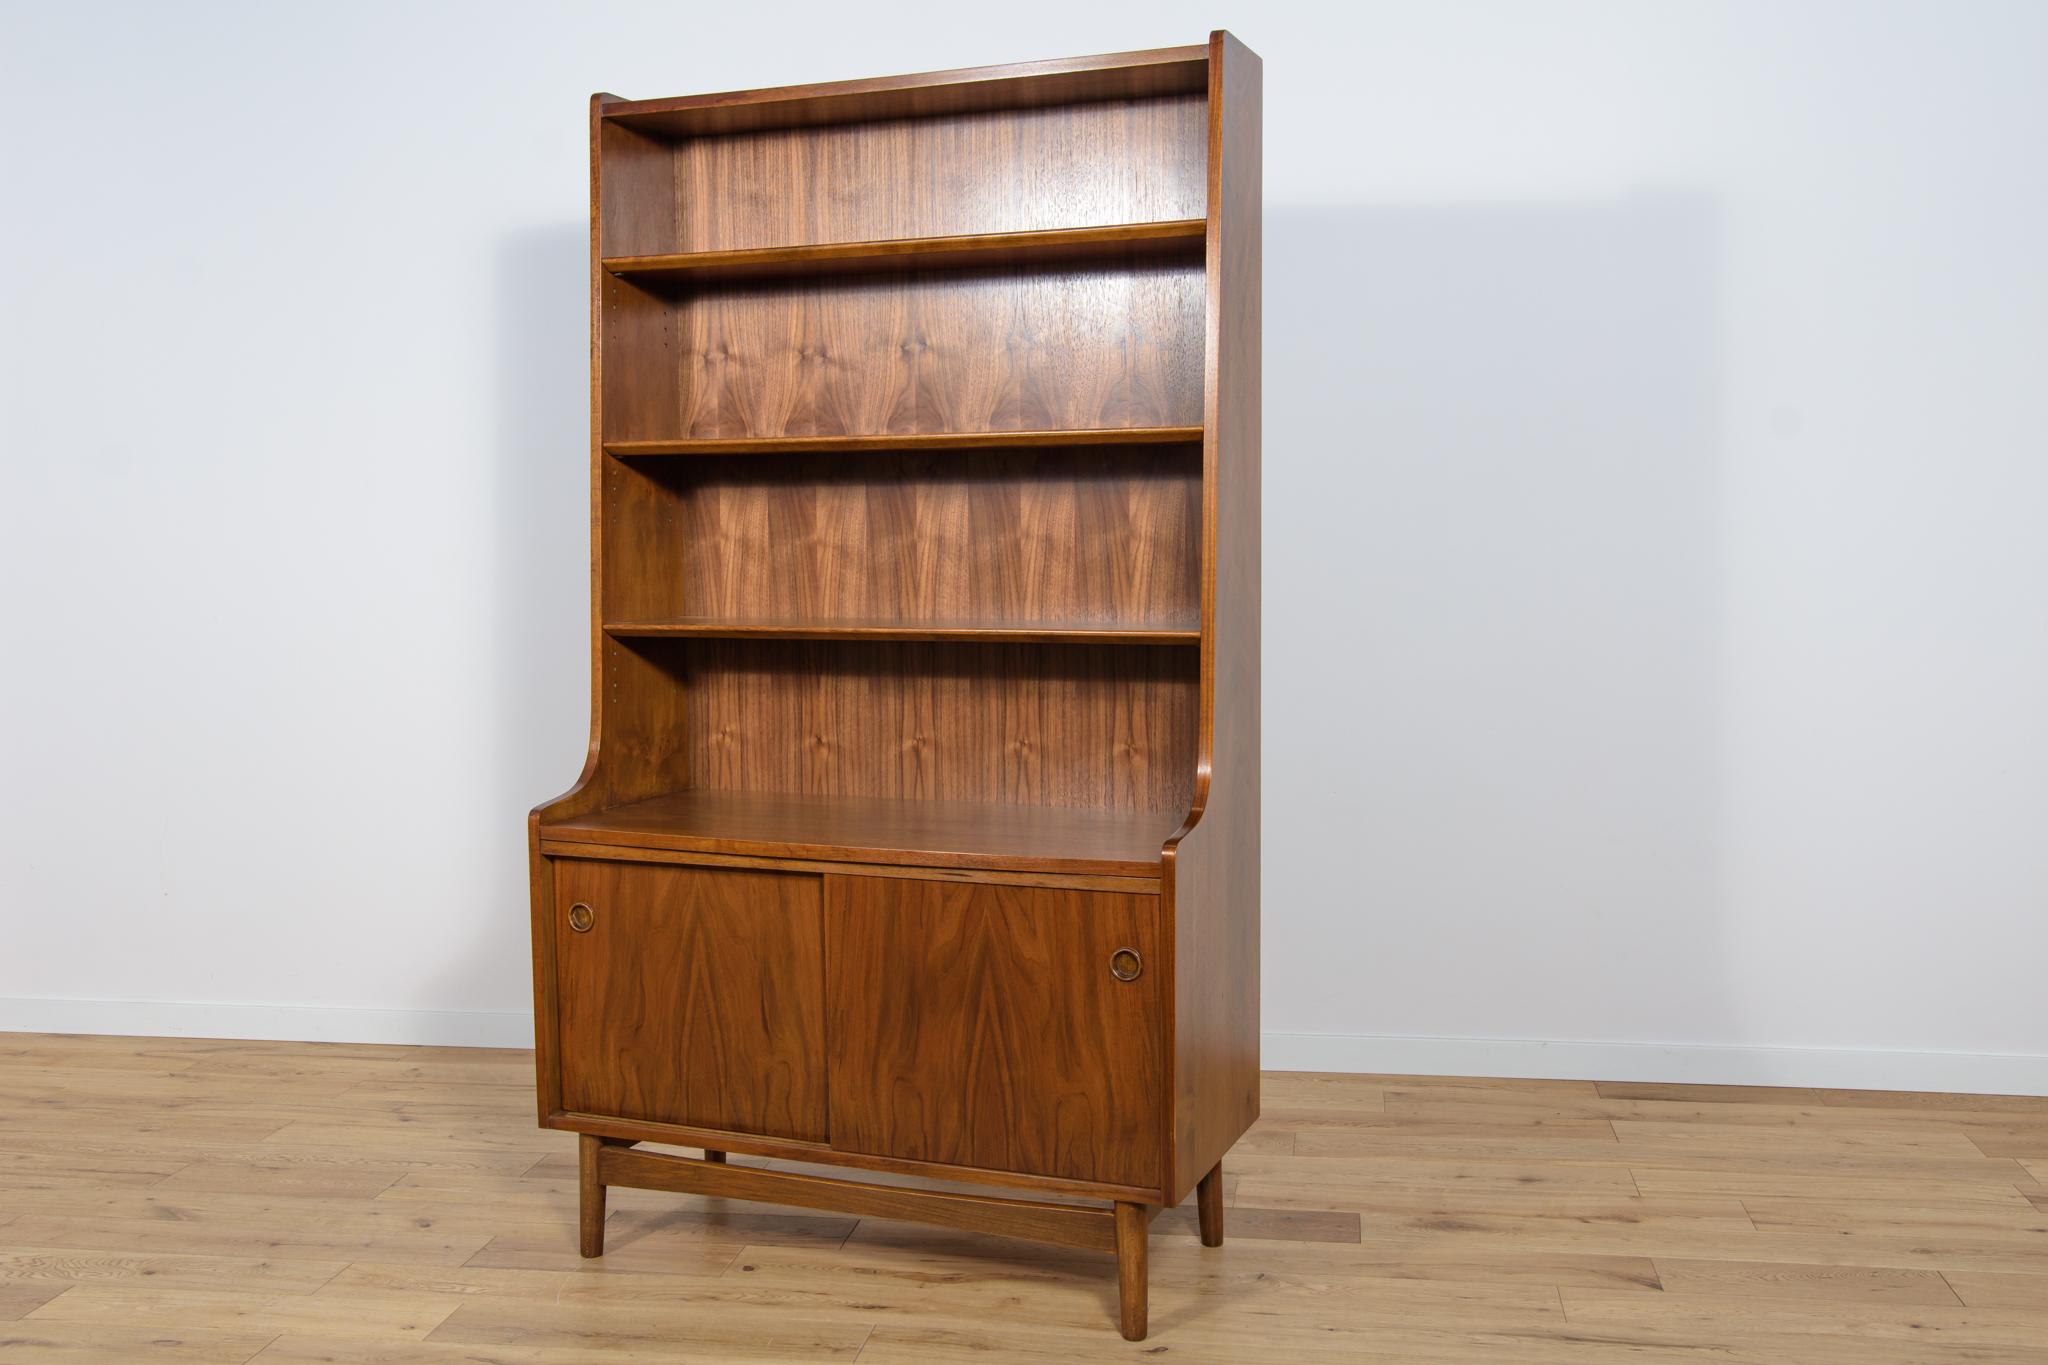 This Mid-Century Danish designed shelf was designed by Johannes Sorth and manufactured by Bornholms Møbelfabrik. It is made of walnut. In the upper part of the bookcase there are four shelves, in the bottom part there are a sliding door cabinet.